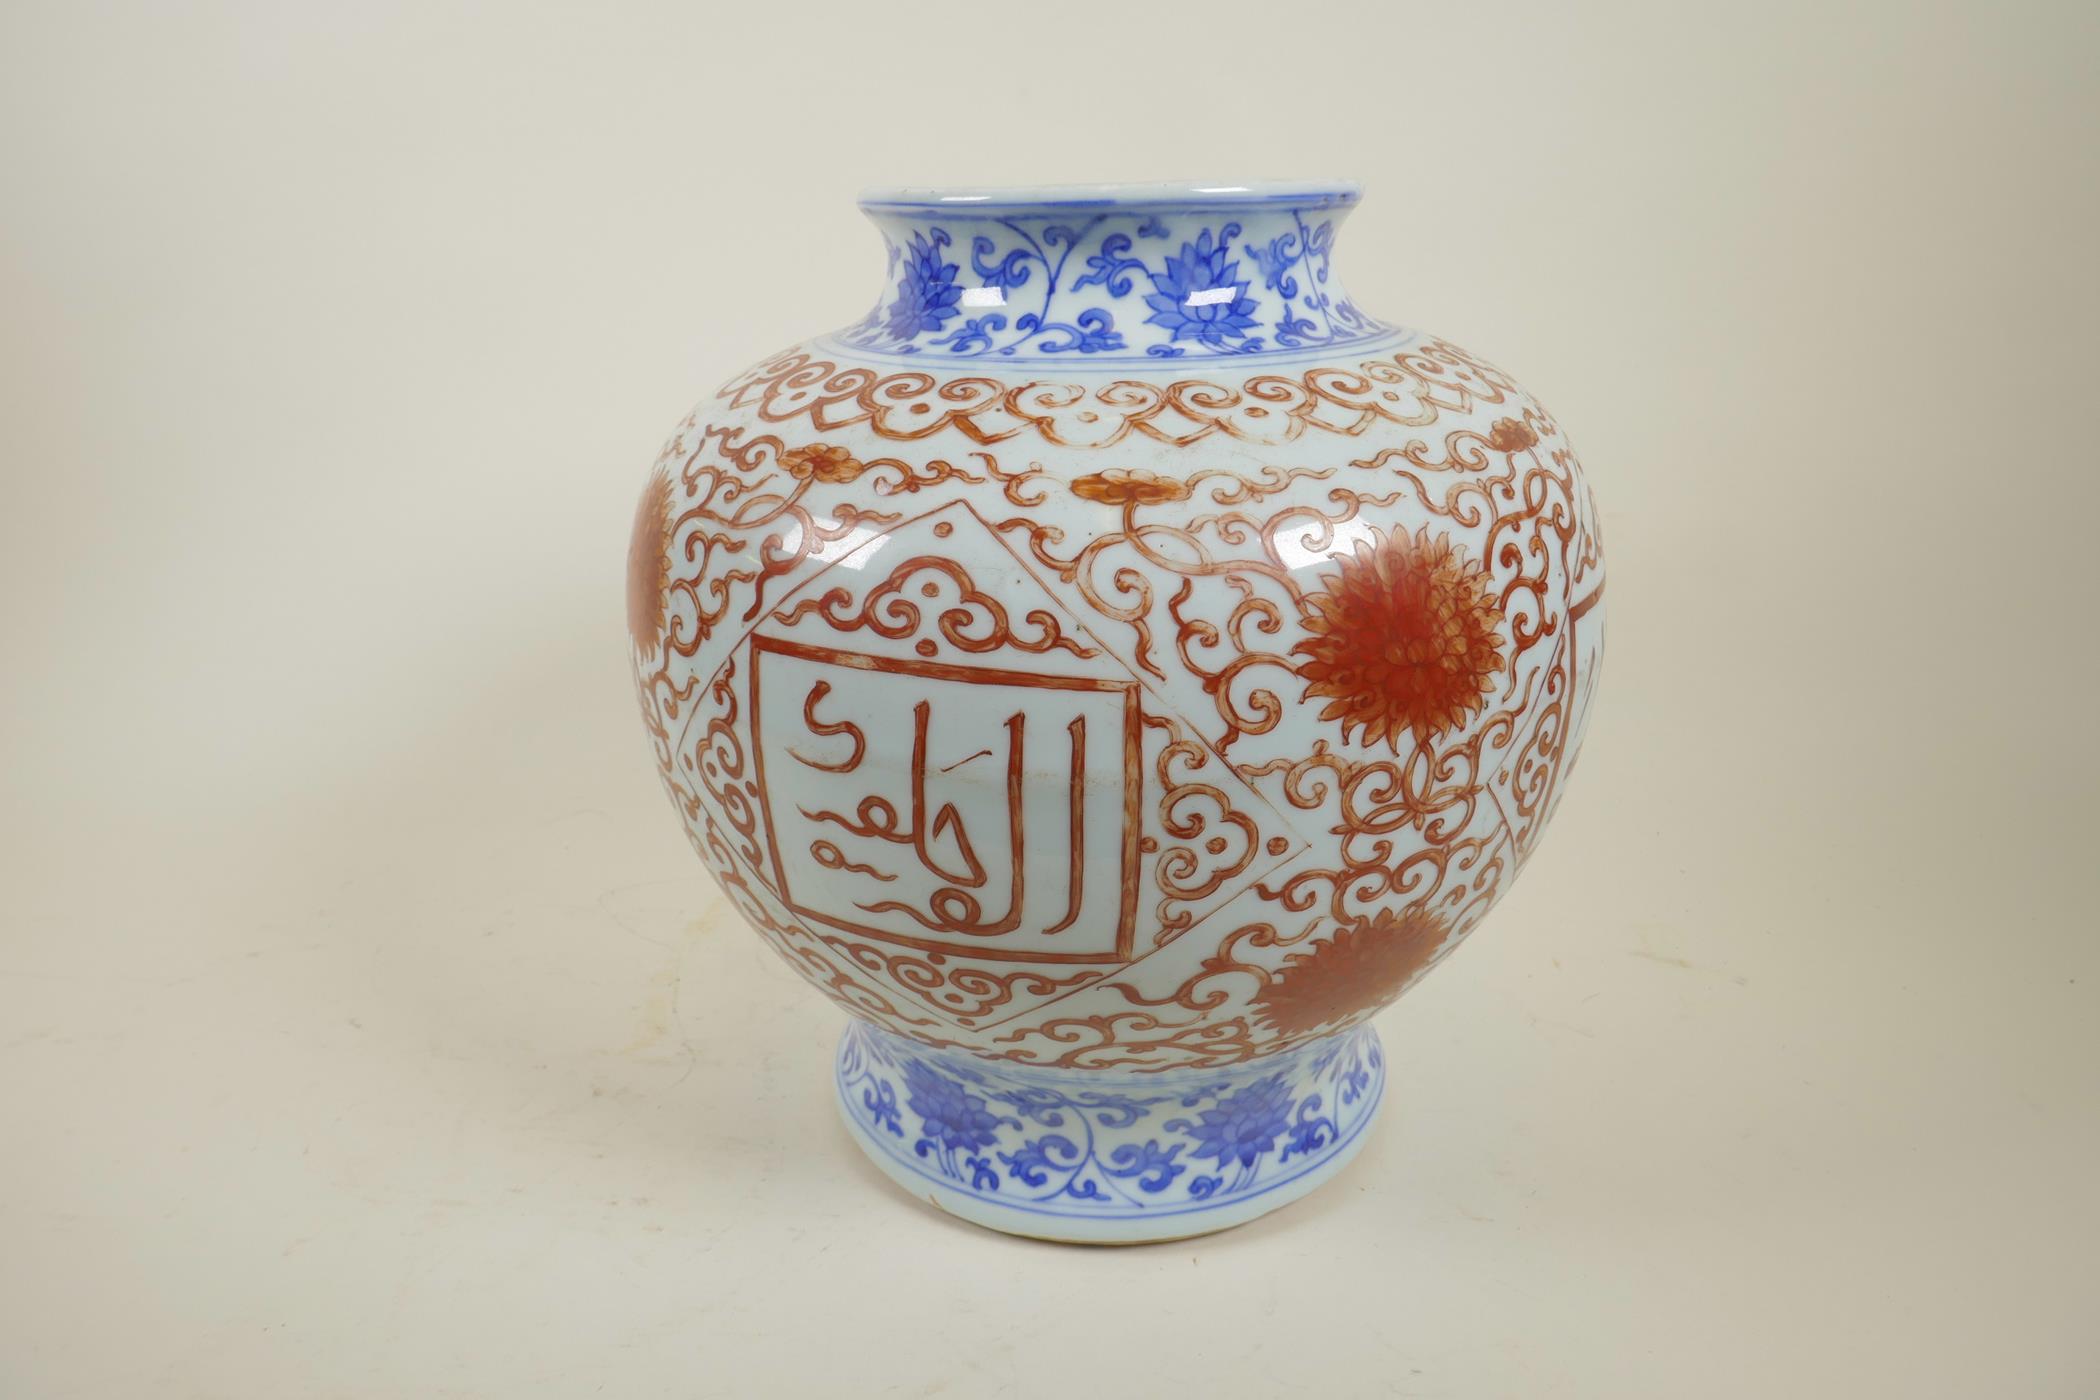 A Chinese porcelain vase with stylised bands of red and blue scrolls and flowers, with panels of - Image 3 of 3